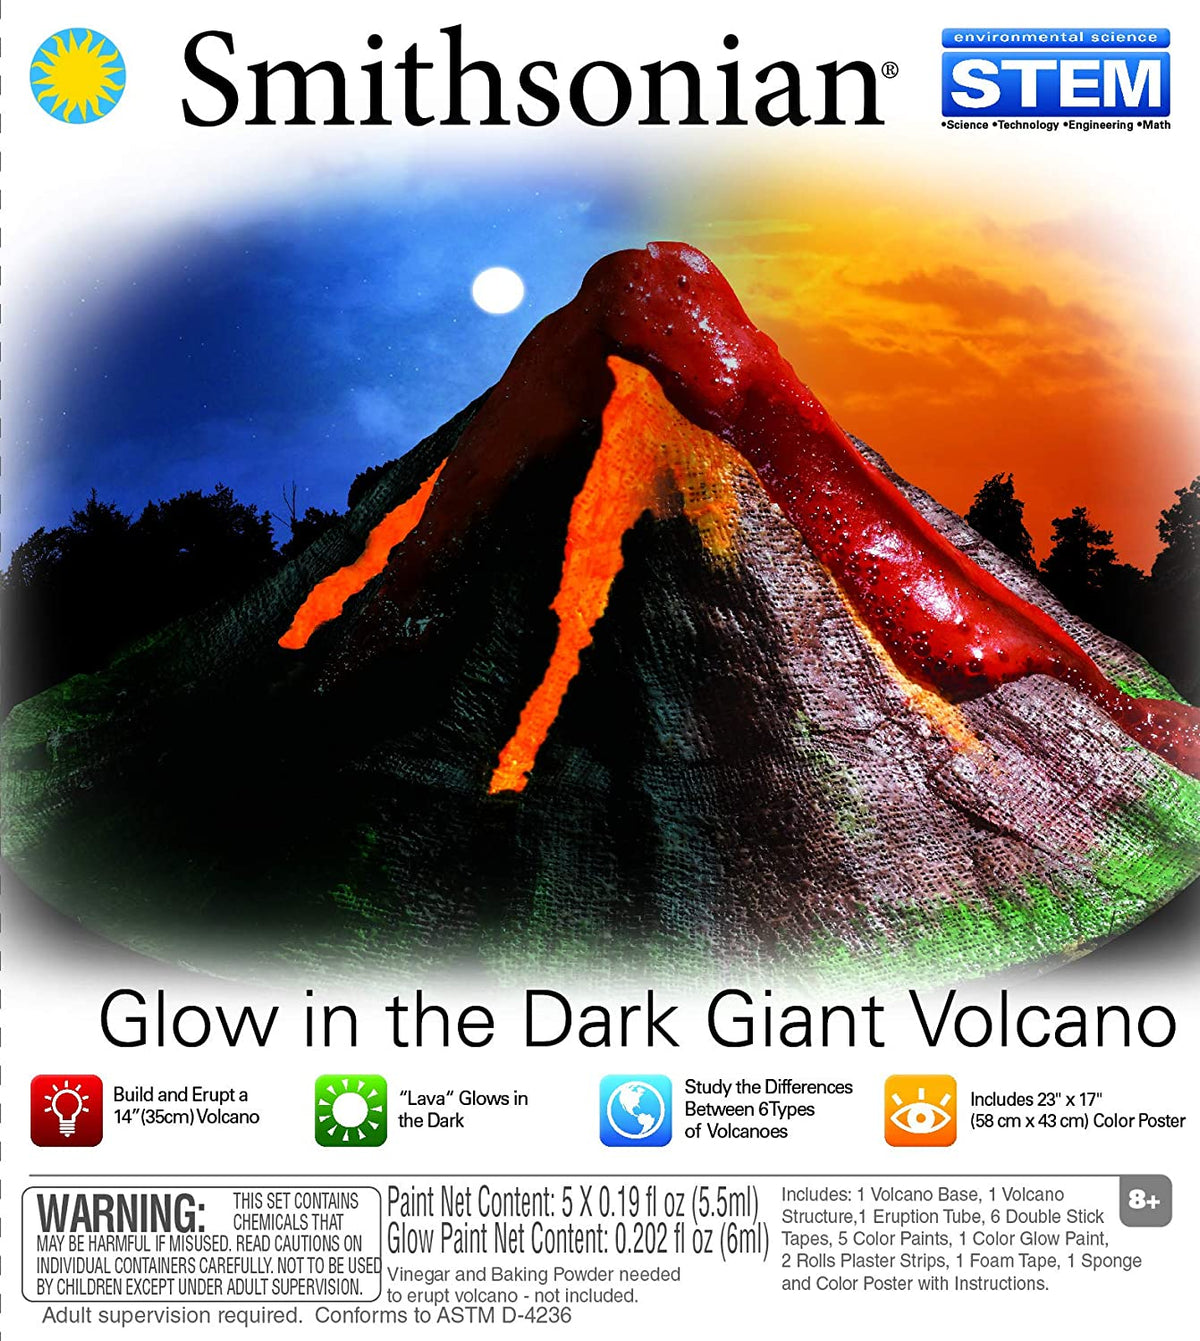 National Geographic Jumbo Volcano Science Kit - Build & Erupt An 18 Giant Volcano, Multiple Eruption Science Experiments, Educational Science Kits, S